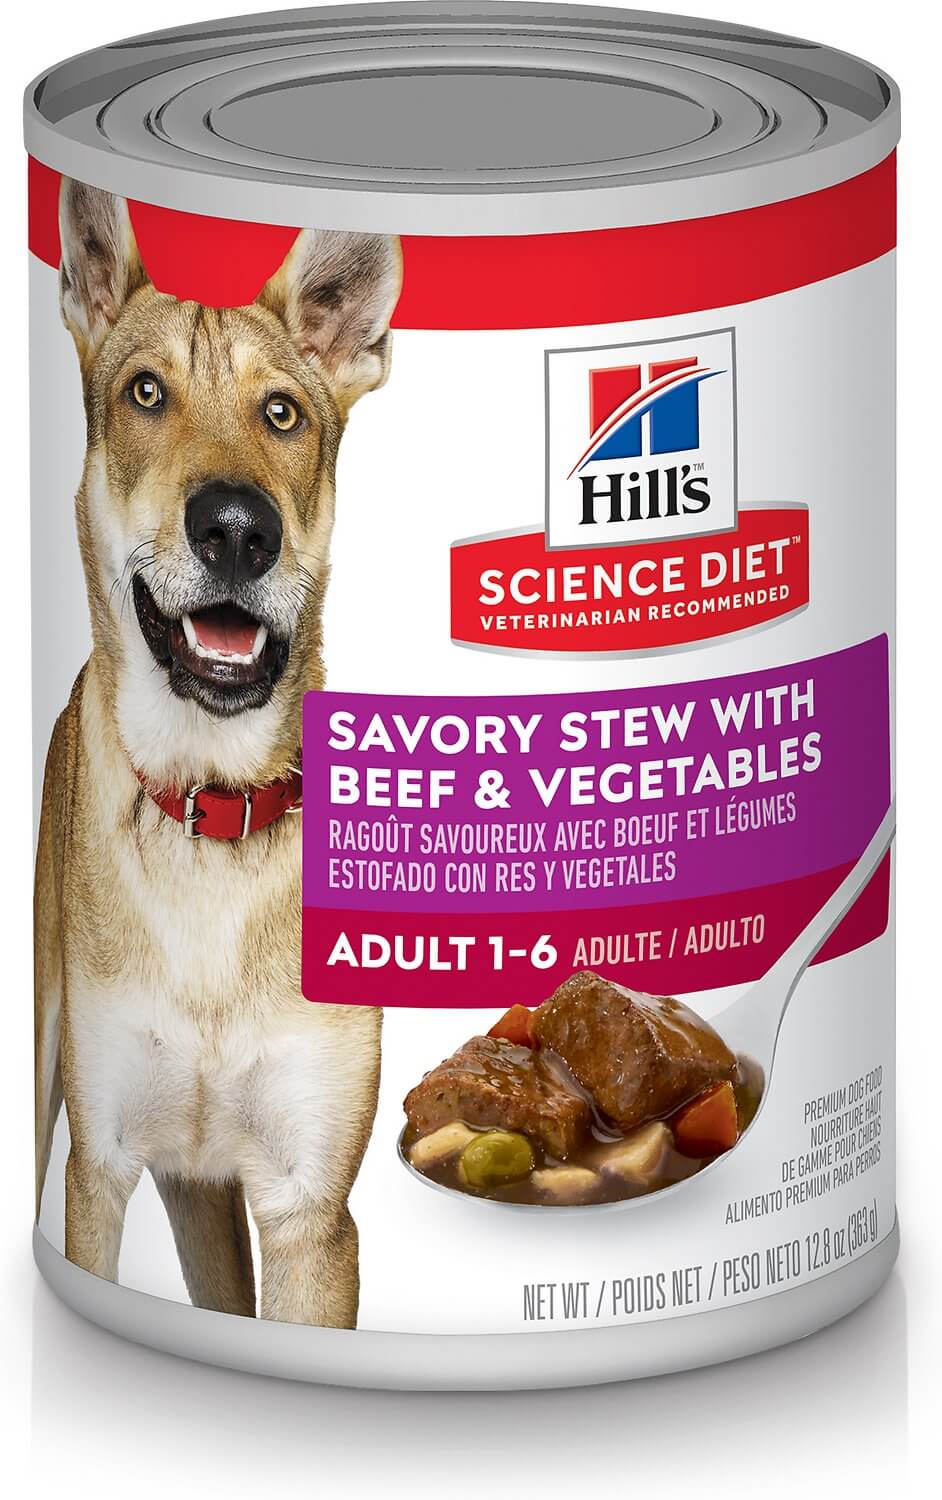 Hill's Science Diet Adult Canned Dog Food Review DogFoodAdvisor